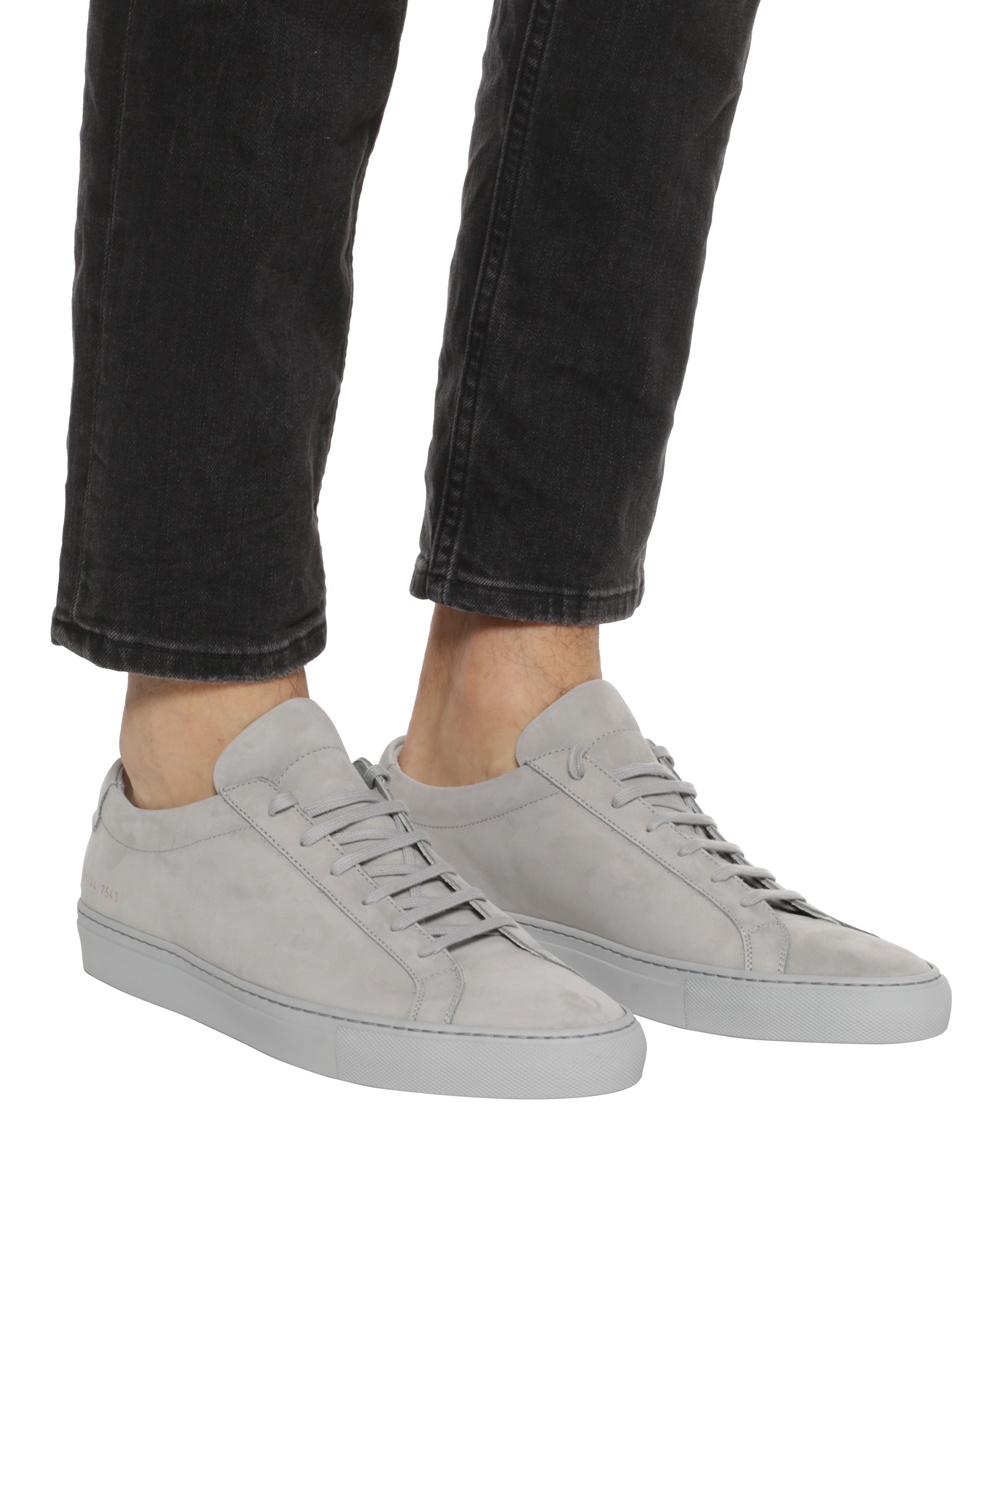 common projects achilles low gray